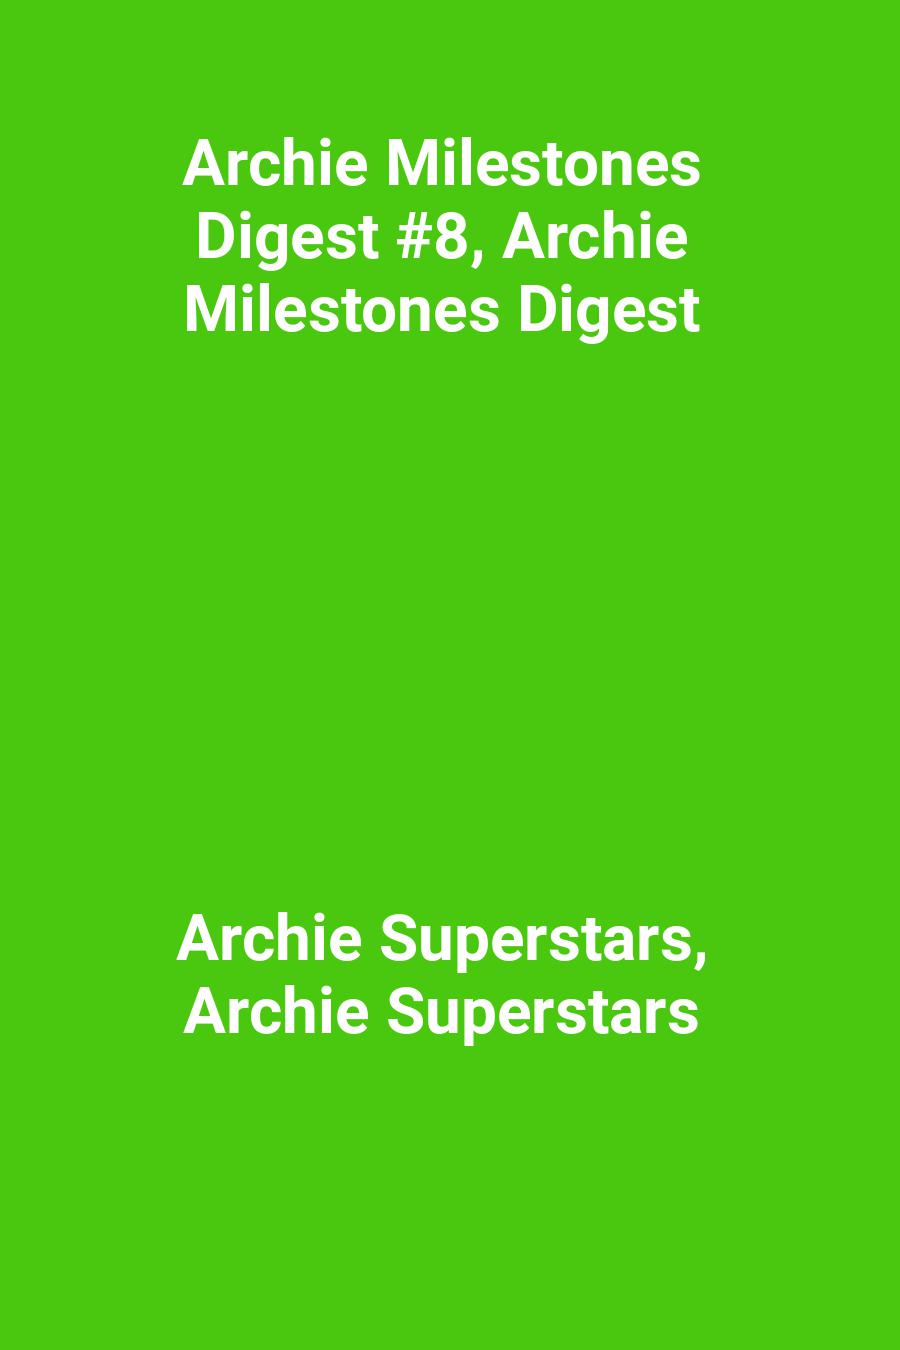 This image is the cover for the book Archie Milestones Digest #8, Archie Milestones Digest